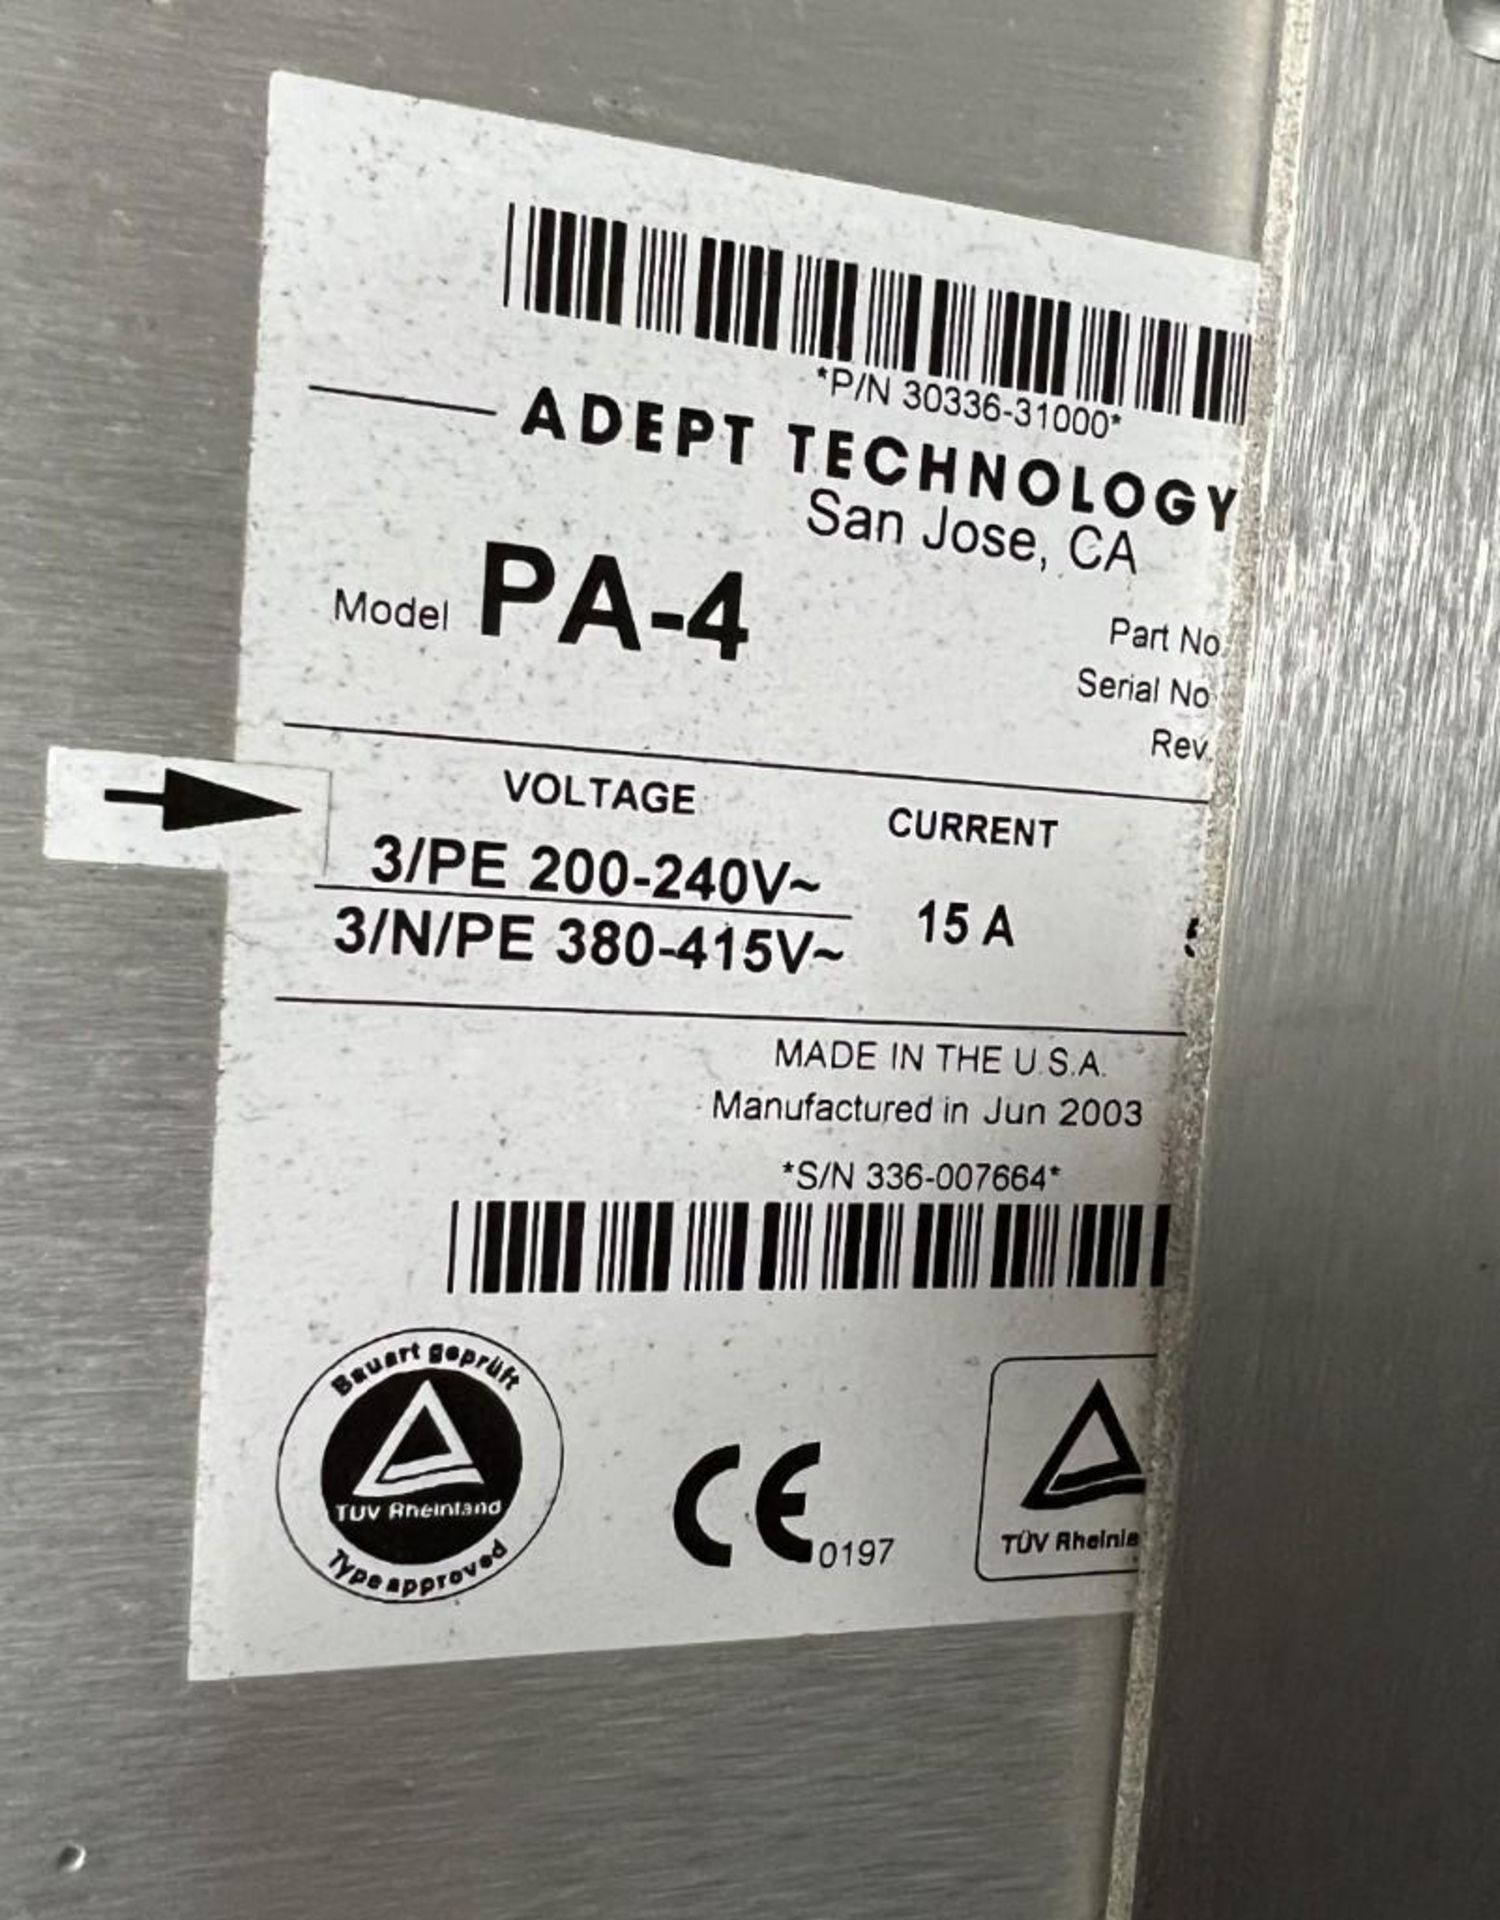 Adept Technology Model PA-4 / PN: 30336-31000 Controller - Image 6 of 6